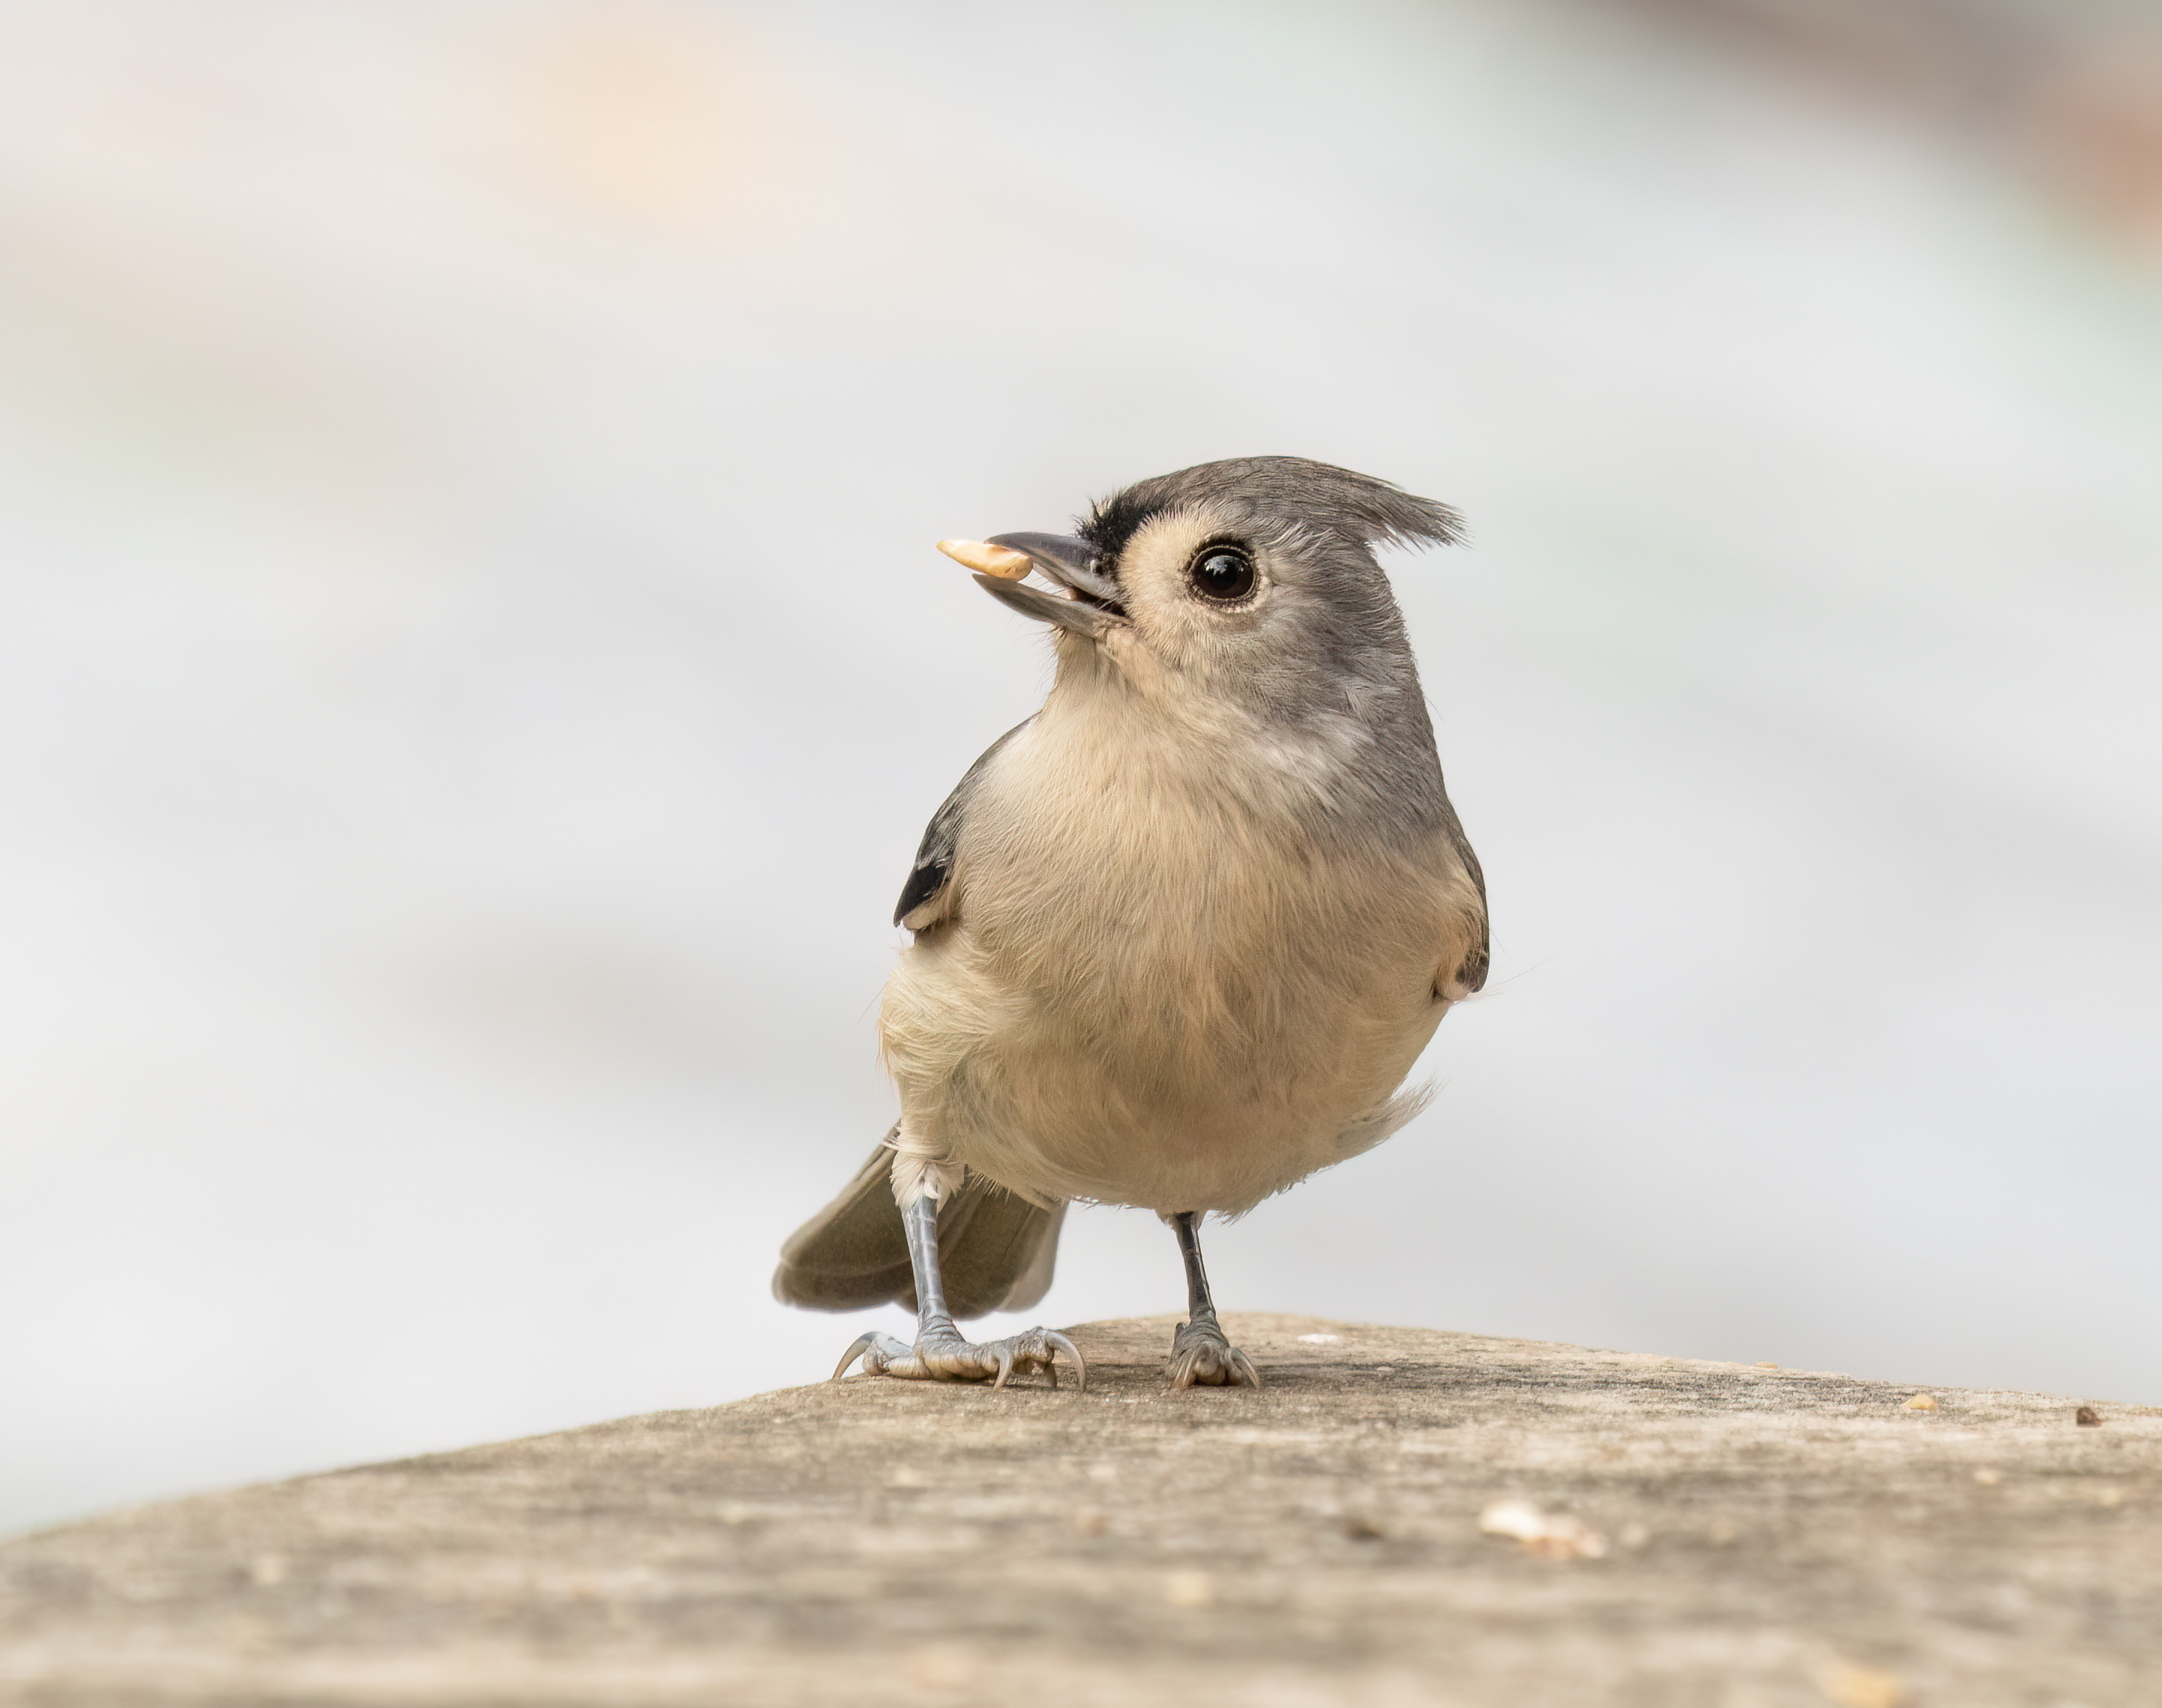 Tufted titmouse (Baeolophus bicolor) in Prospect Park, Brooklyn, NY USA by Rhododendrites